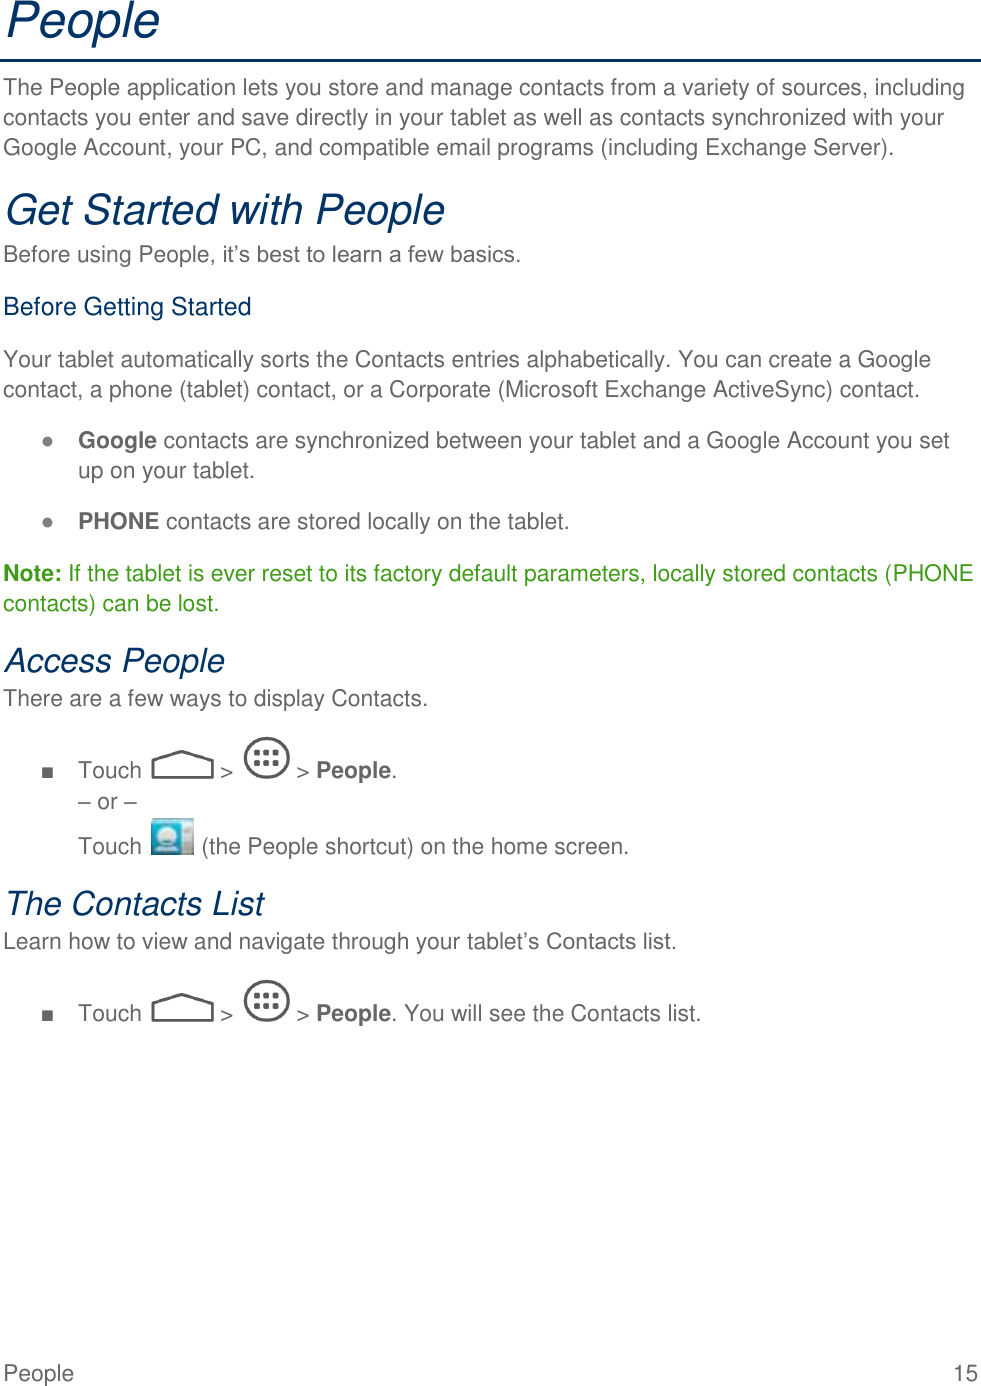  People  15 People The People application lets you store and manage contacts from a variety of sources, including contacts you enter and save directly in your tablet as well as contacts synchronized with your Google Account, your PC, and compatible email programs (including Exchange Server). Get Started with People Before using People, it’s best to learn a few basics. Before Getting Started Your tablet automatically sorts the Contacts entries alphabetically. You can create a Google contact, a phone (tablet) contact, or a Corporate (Microsoft Exchange ActiveSync) contact. ● Google contacts are synchronized between your tablet and a Google Account you set up on your tablet. ● PHONE contacts are stored locally on the tablet. Note: If the tablet is ever reset to its factory default parameters, locally stored contacts (PHONE contacts) can be lost. Access People There are a few ways to display Contacts. ■  Touch   &gt;   &gt; People. – or –  Touch   (the People shortcut) on the home screen. The Contacts List Learn how to view and navigate through your tablet’s Contacts list. ■  Touch   &gt;   &gt; People. You will see the Contacts list. 